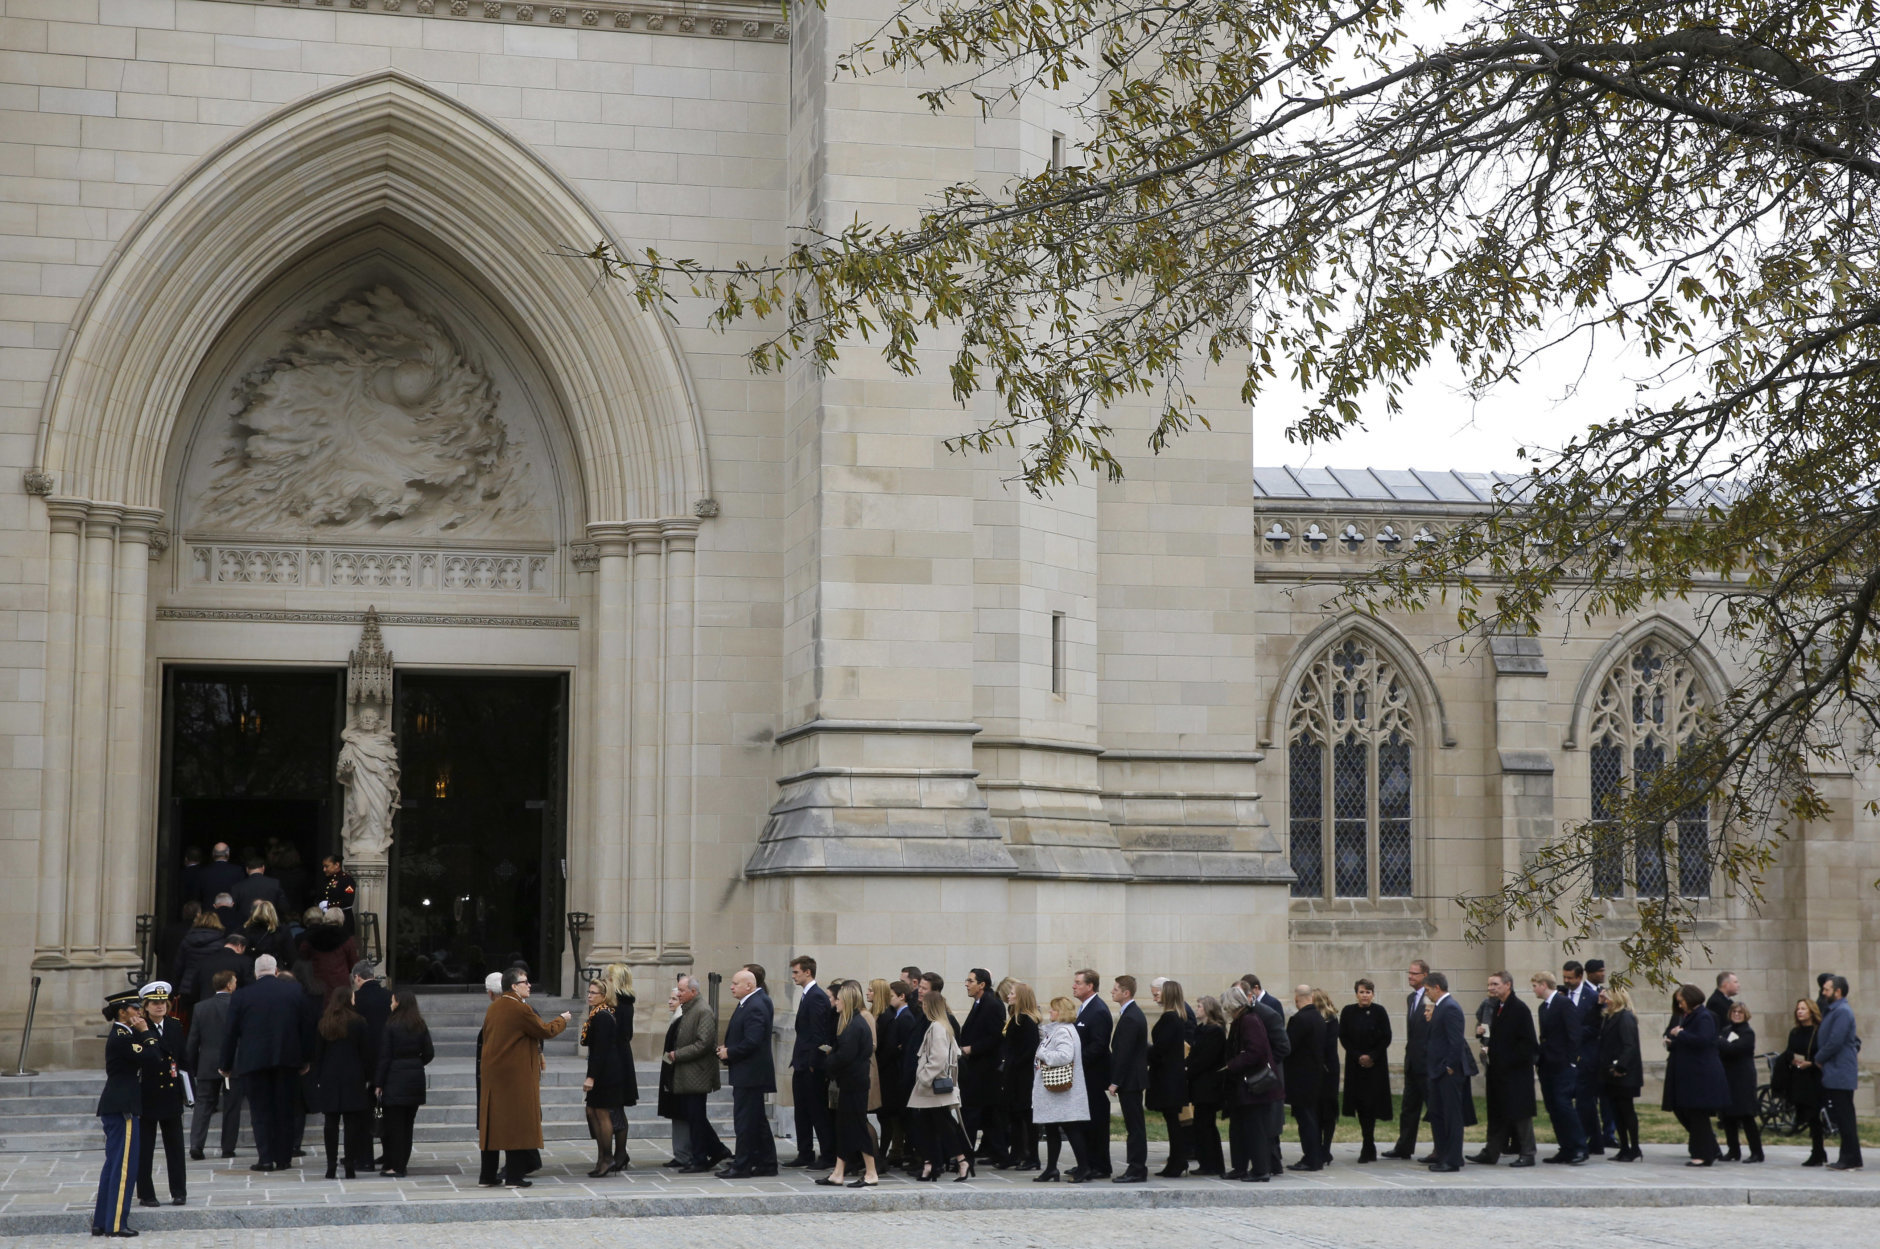 Mourners file into the Washington National Cathedral before the State Funeral for former President George H.W. Bush in Washington, Wednesday, Dec. 5, 2018. (AP Photo/Patrick Semansky)